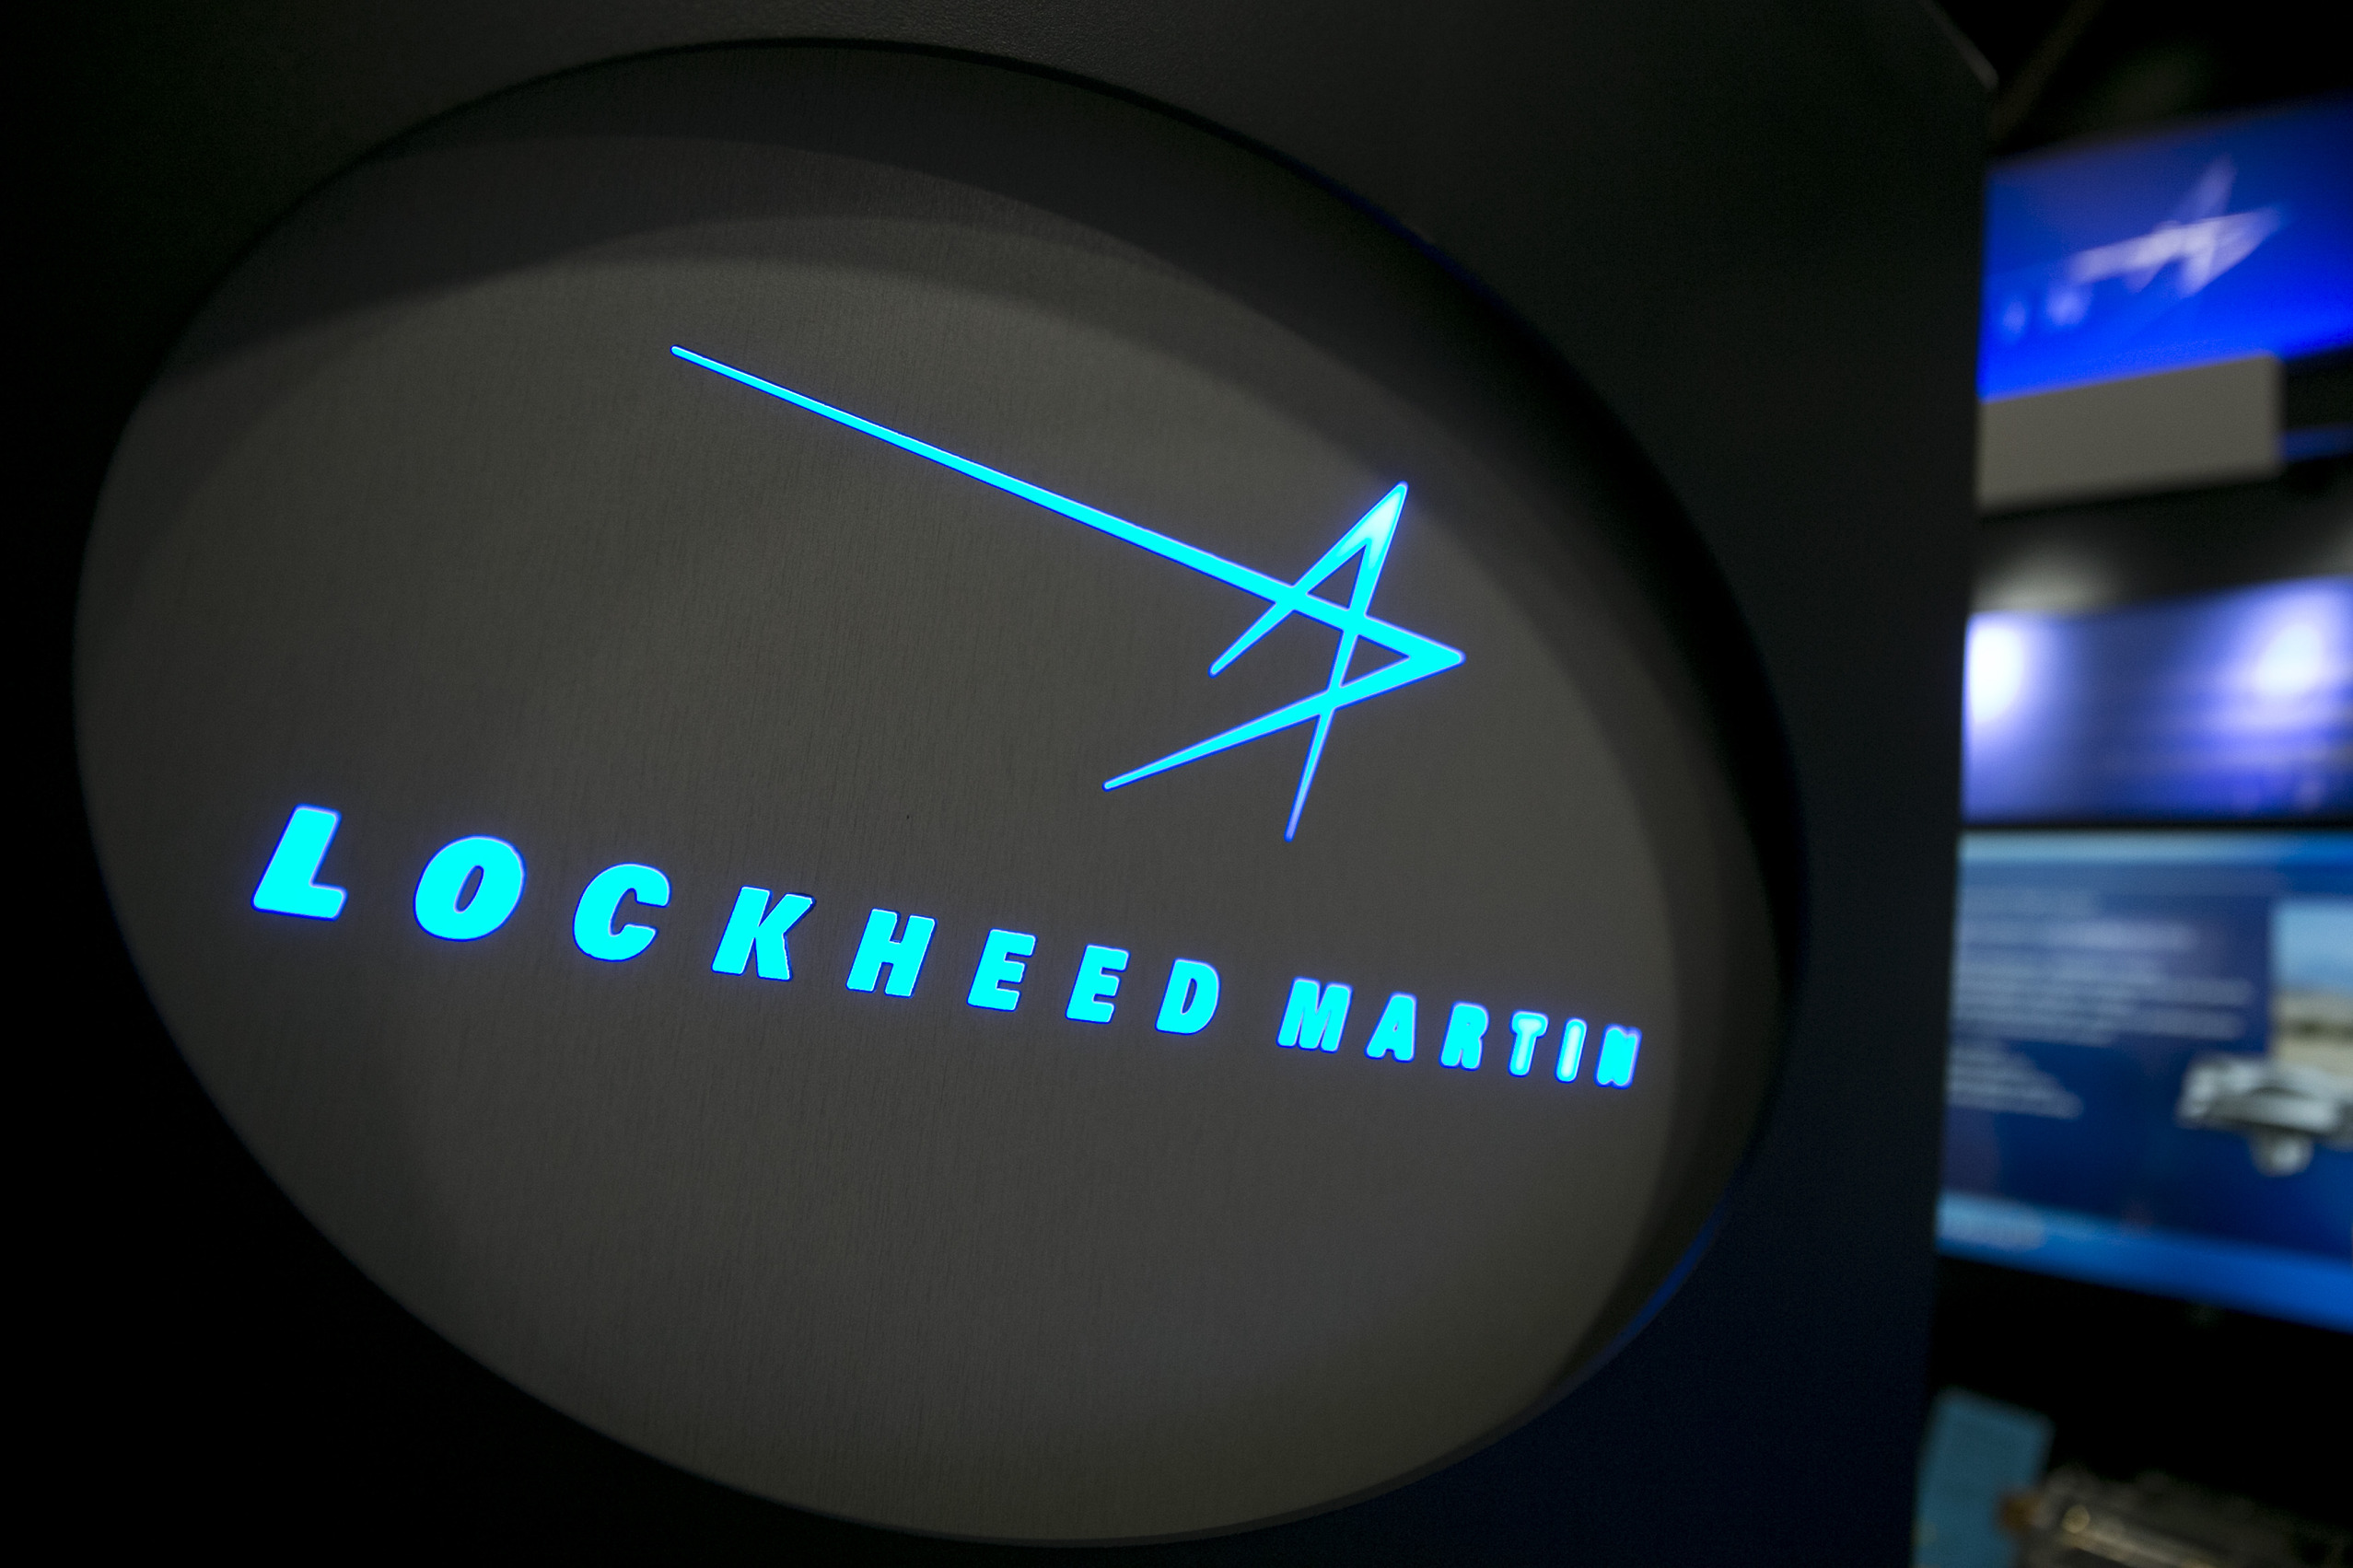 Defense stocks including Lockheed Martin have undershot&nbsp;shares of other companies that are more vulnerable to the pandemic.